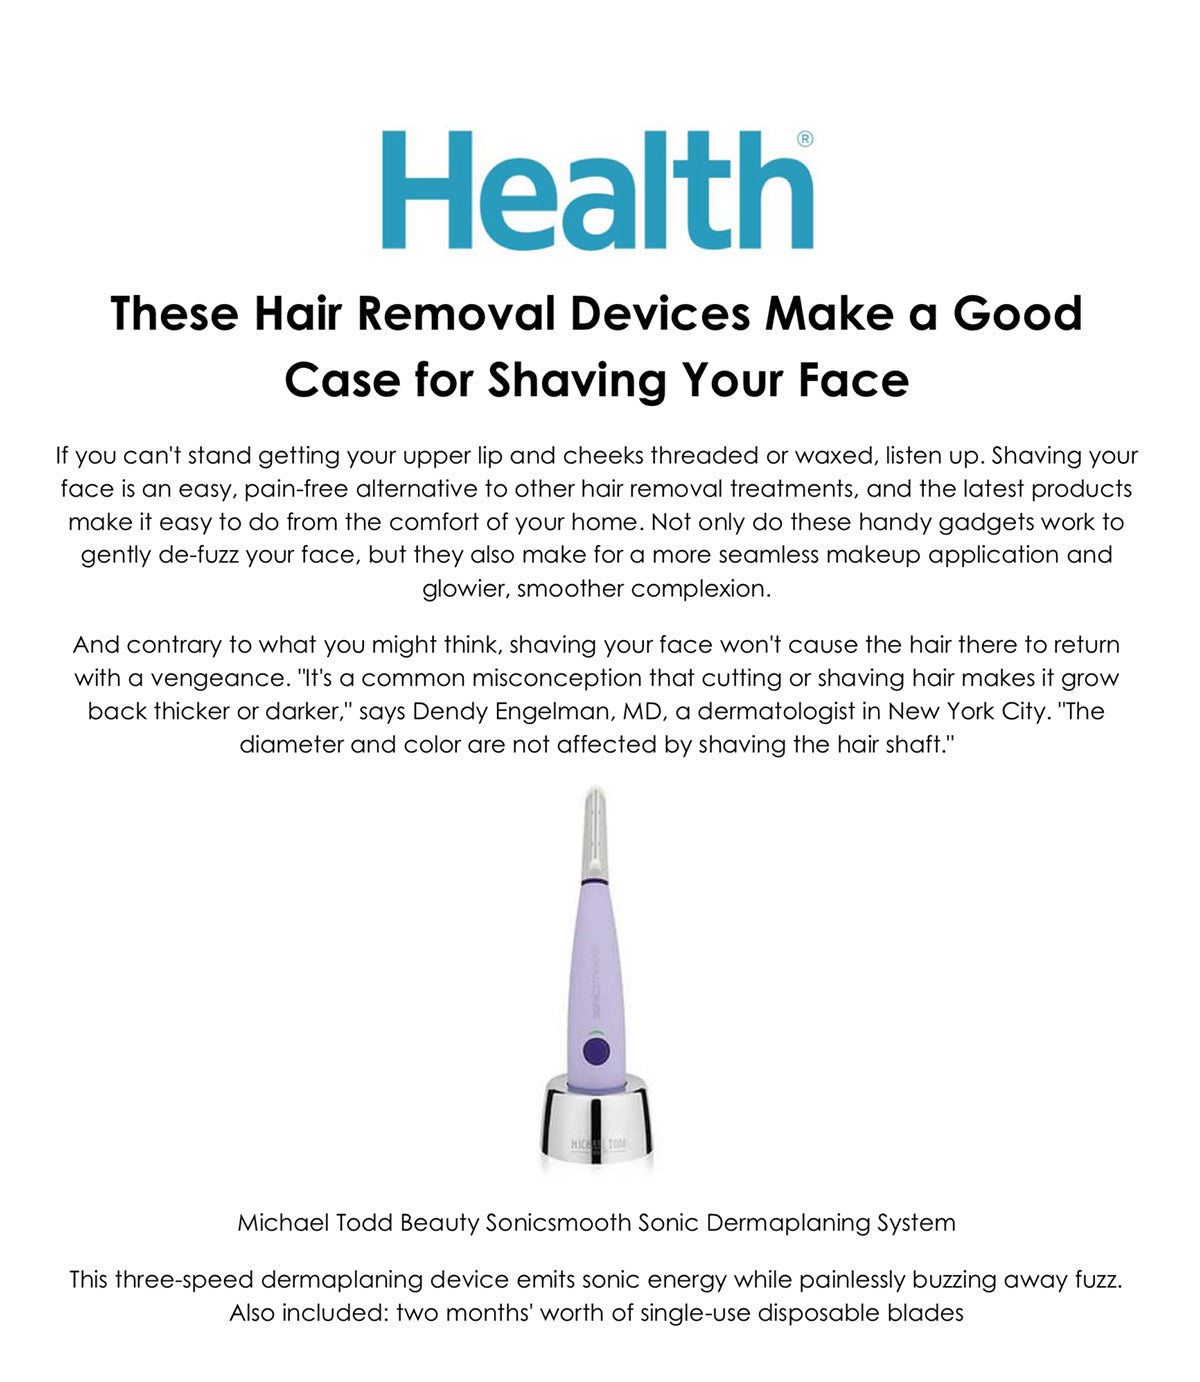 Hair Removal Devices Make a Good Case for Shaving Your Face